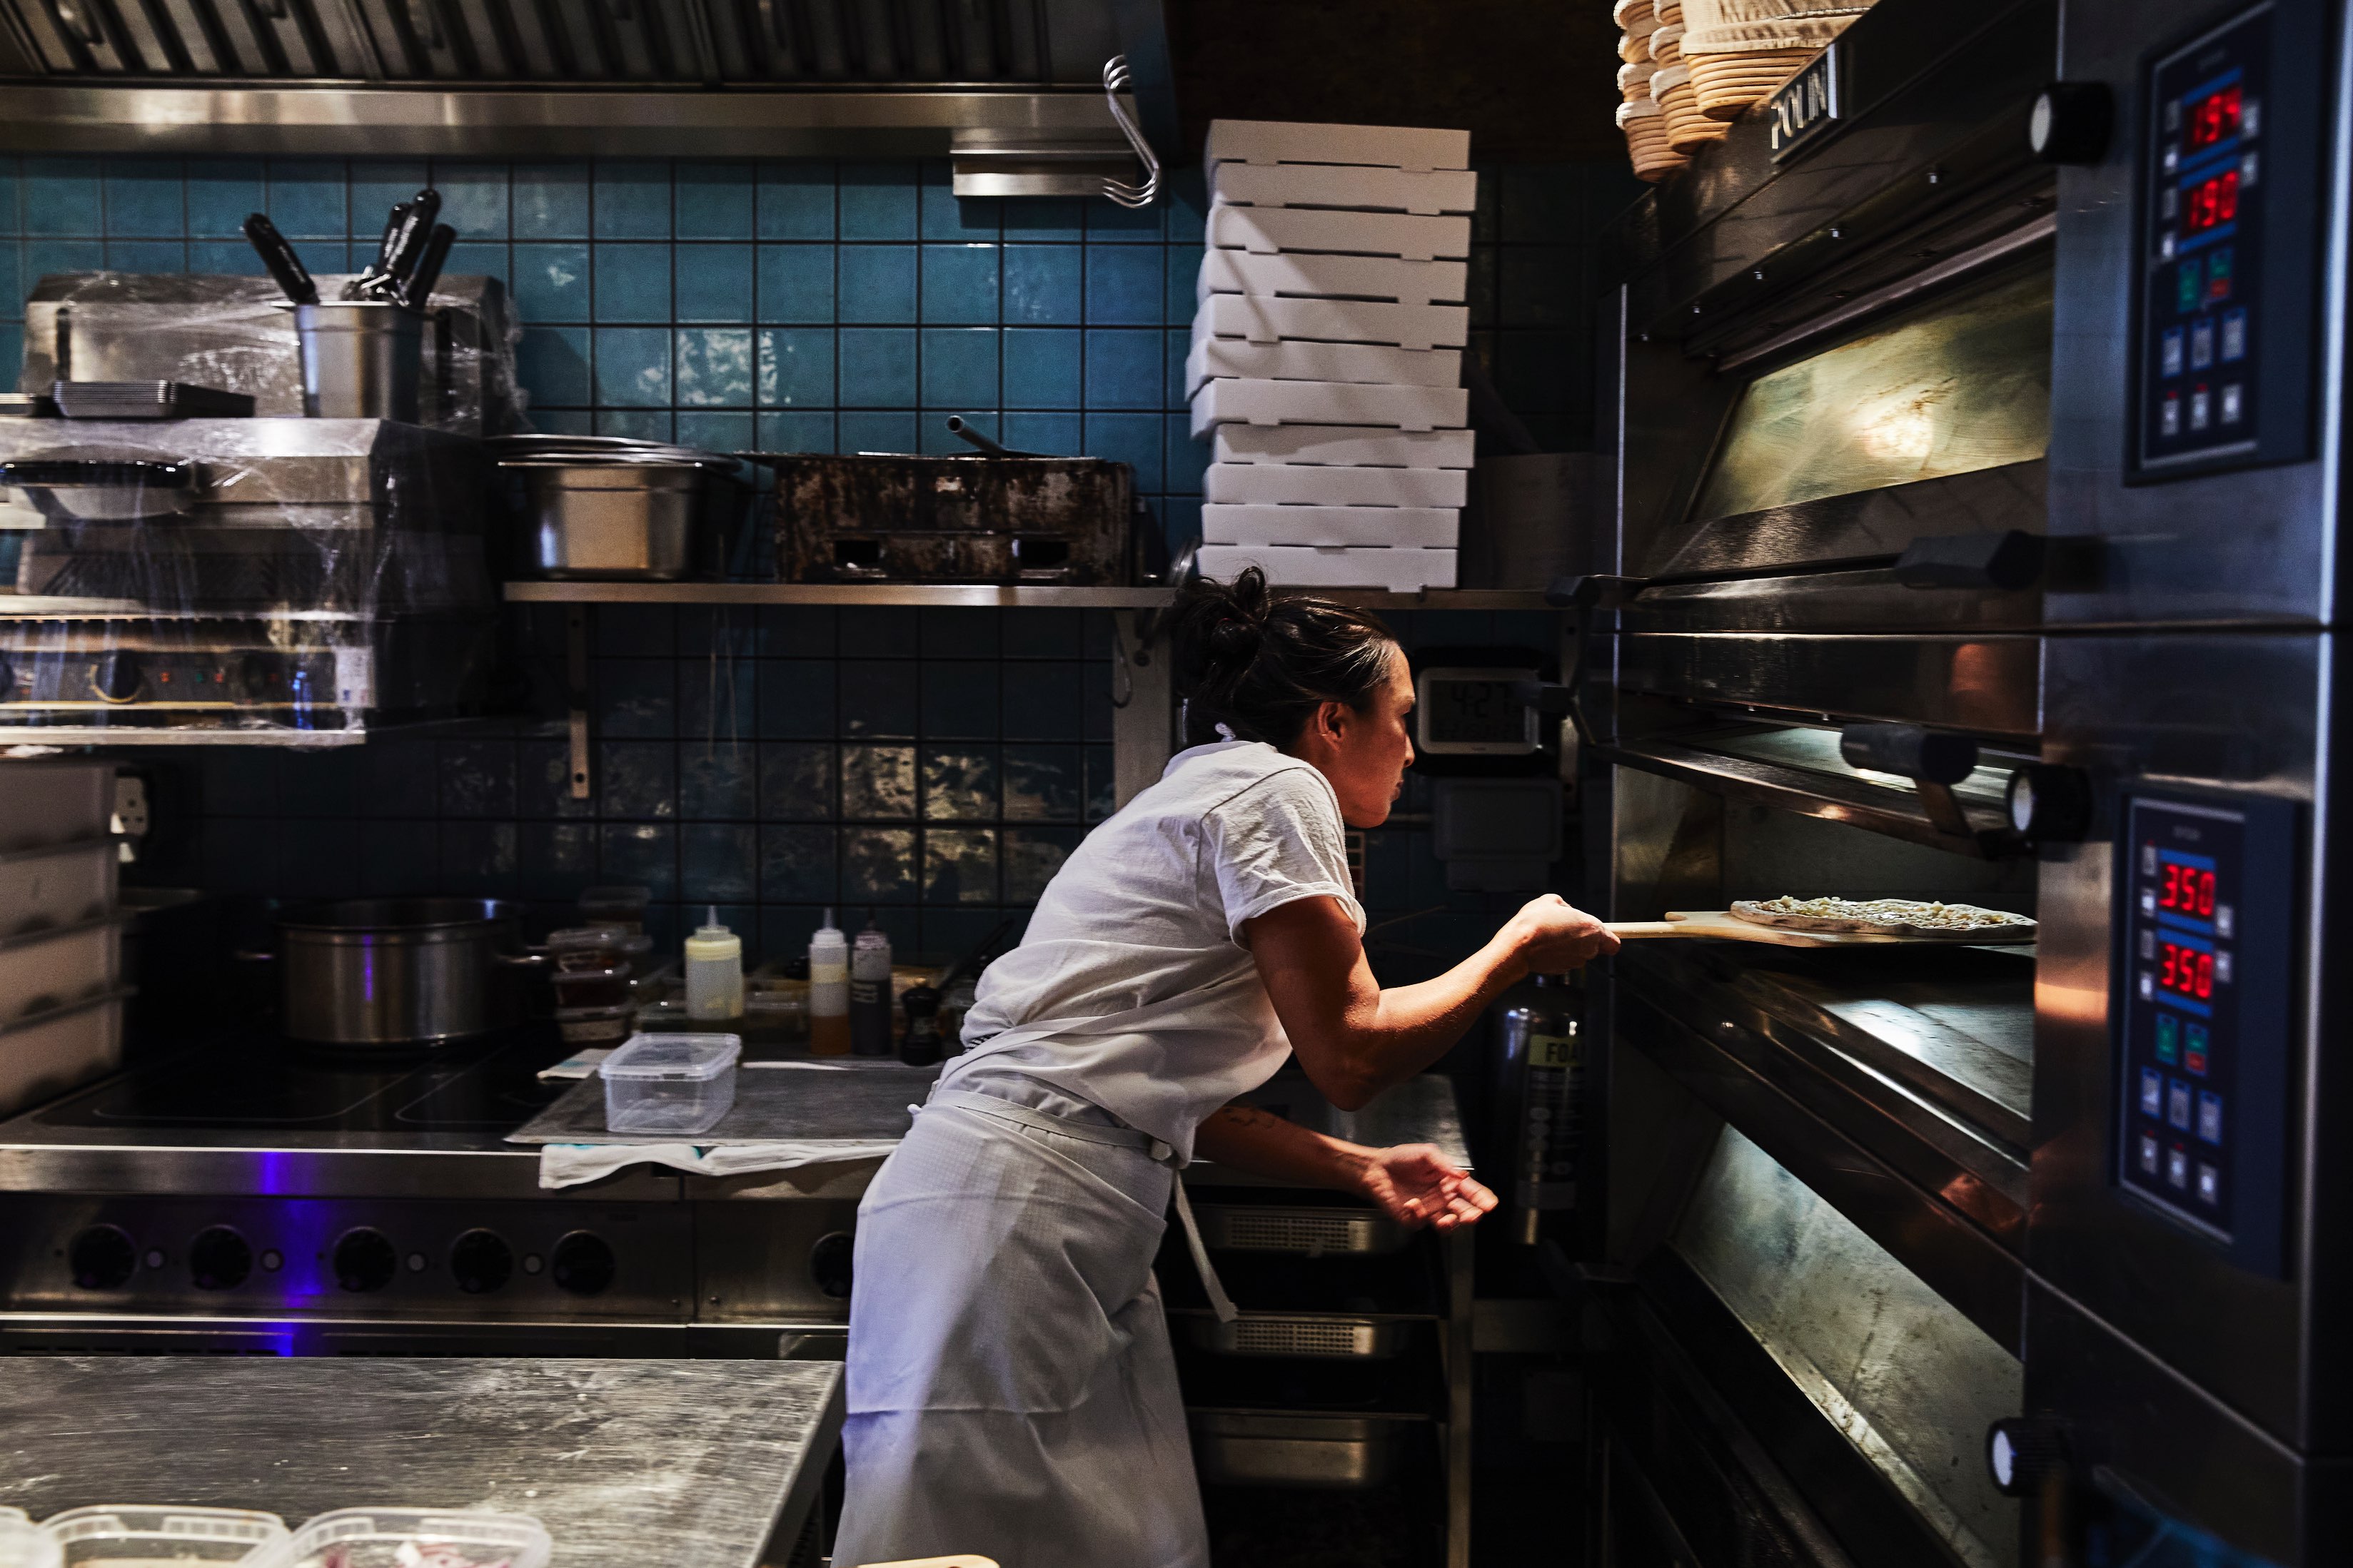 Pam Yung of ASAP pizza, at Flor, slides a pizza into a deck oven using a wooden peel